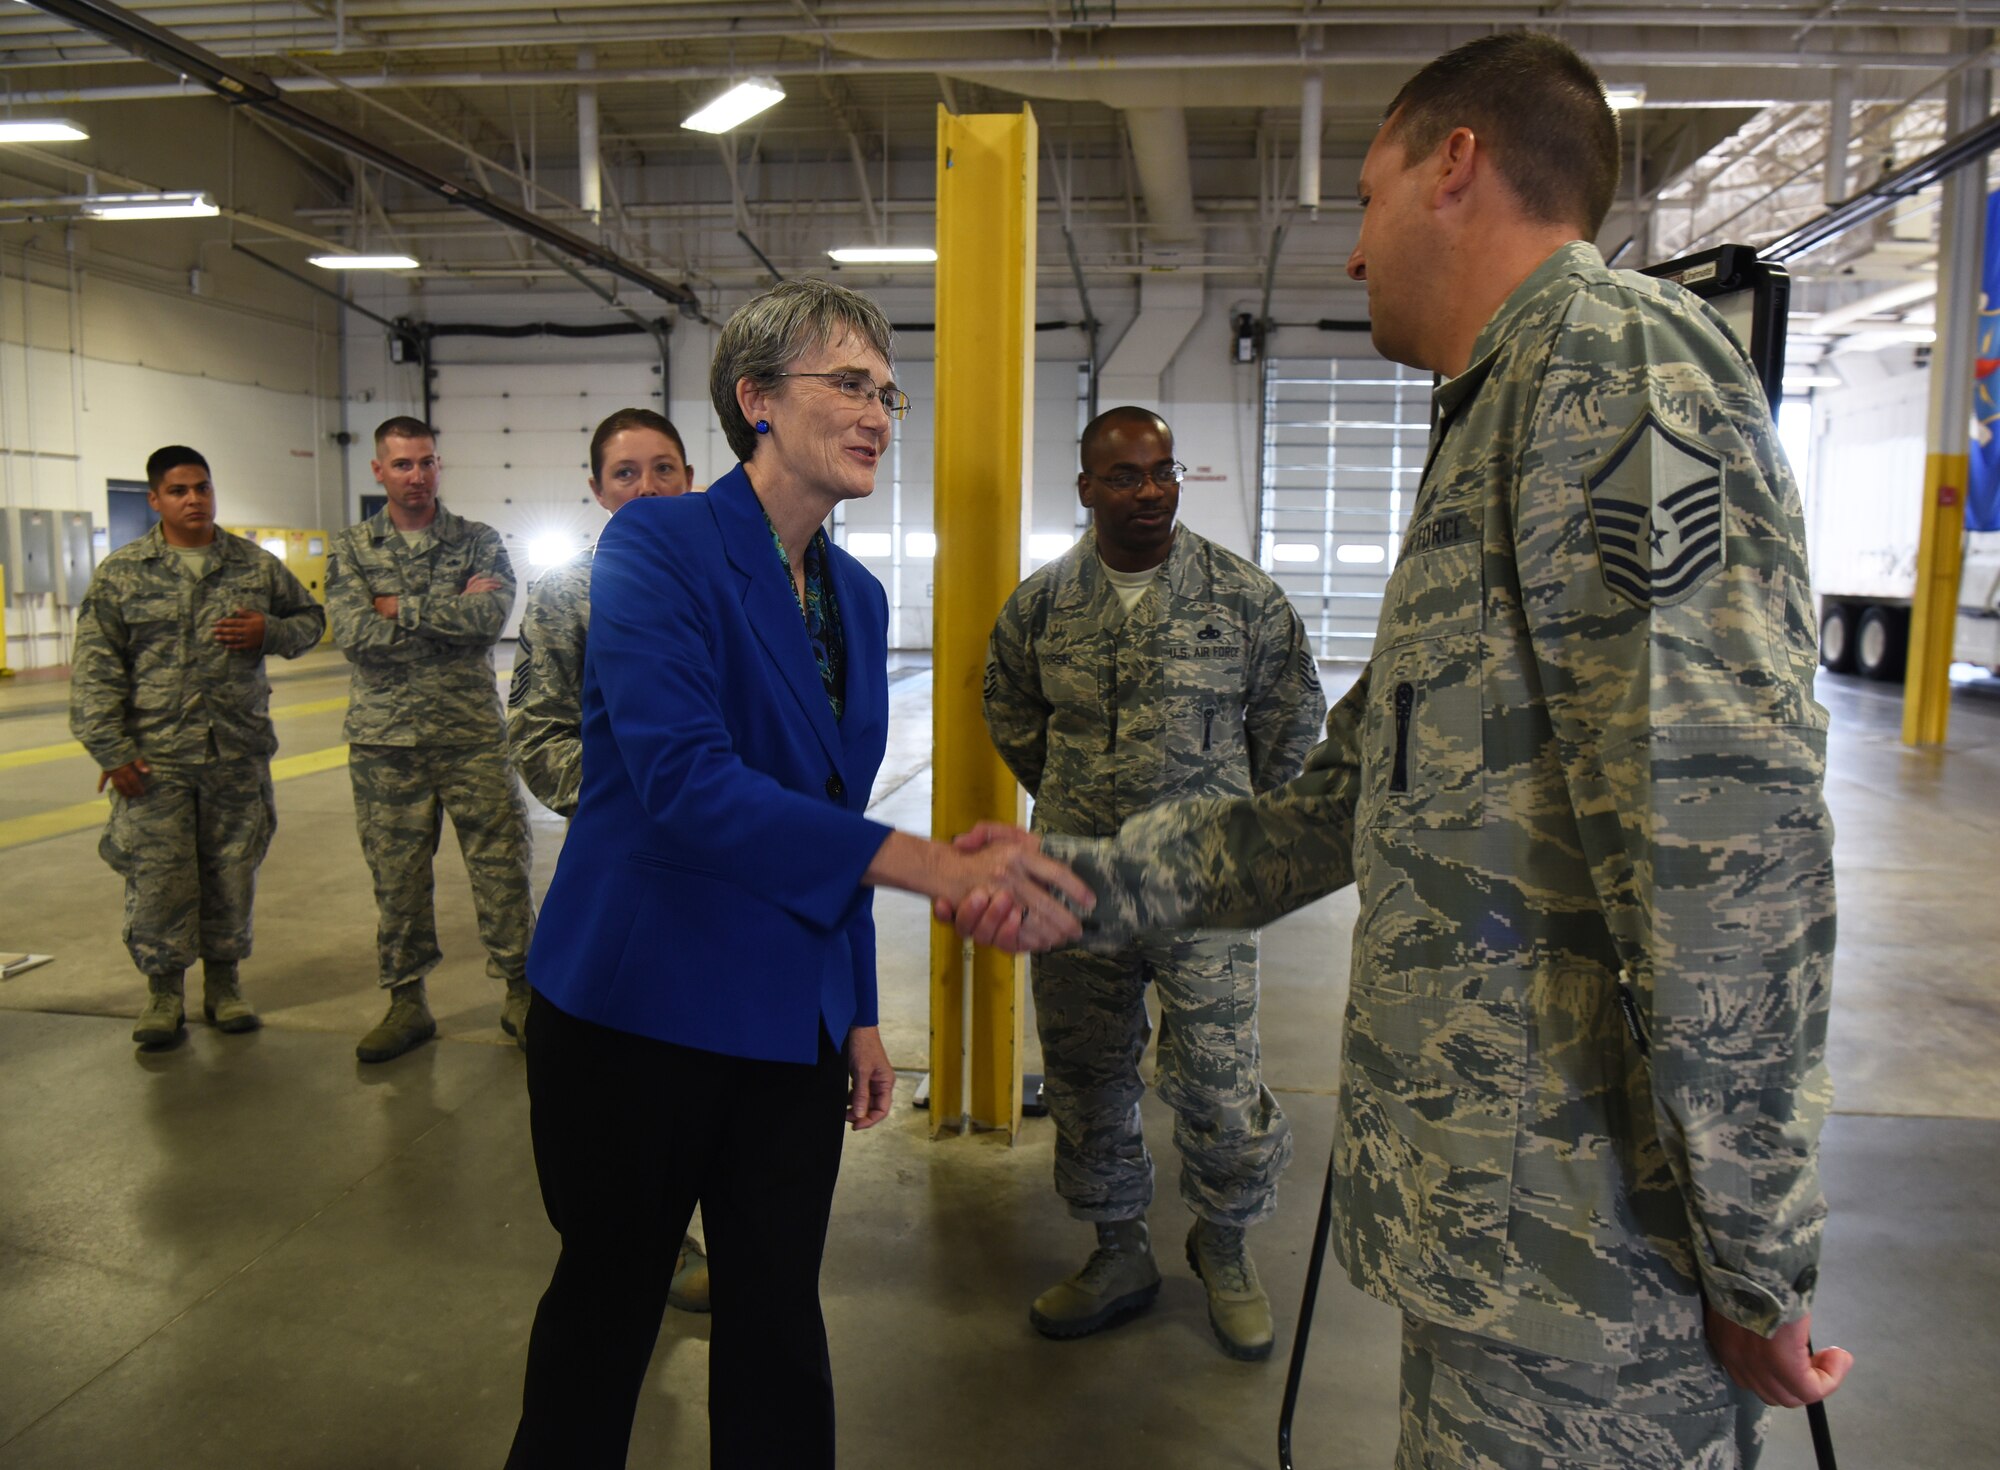 Secretary of the Air Force Heather Wilson shakes hands with Master Sgt. Chad Trageser, 790th Maintenance Squadron production superintendent, during her tour Aug. 8, 2018, at F.E. Warren Air Force Base, Wyo. Wilson stopped by the 90th Maintenance Group building to speak with the 90th Missile Wing’s Innovation Fund winners. Trageser’s idea is to build an explosive ordinance disposal training site on base. Wilson visited the base to emphasize the importance of the wing’s deterrence mission and to thank the Airmen for ensuring it is accomplished safely, securely and effectively every day. (U.S. Air Force photo by Senior Airman Breanna Carter)